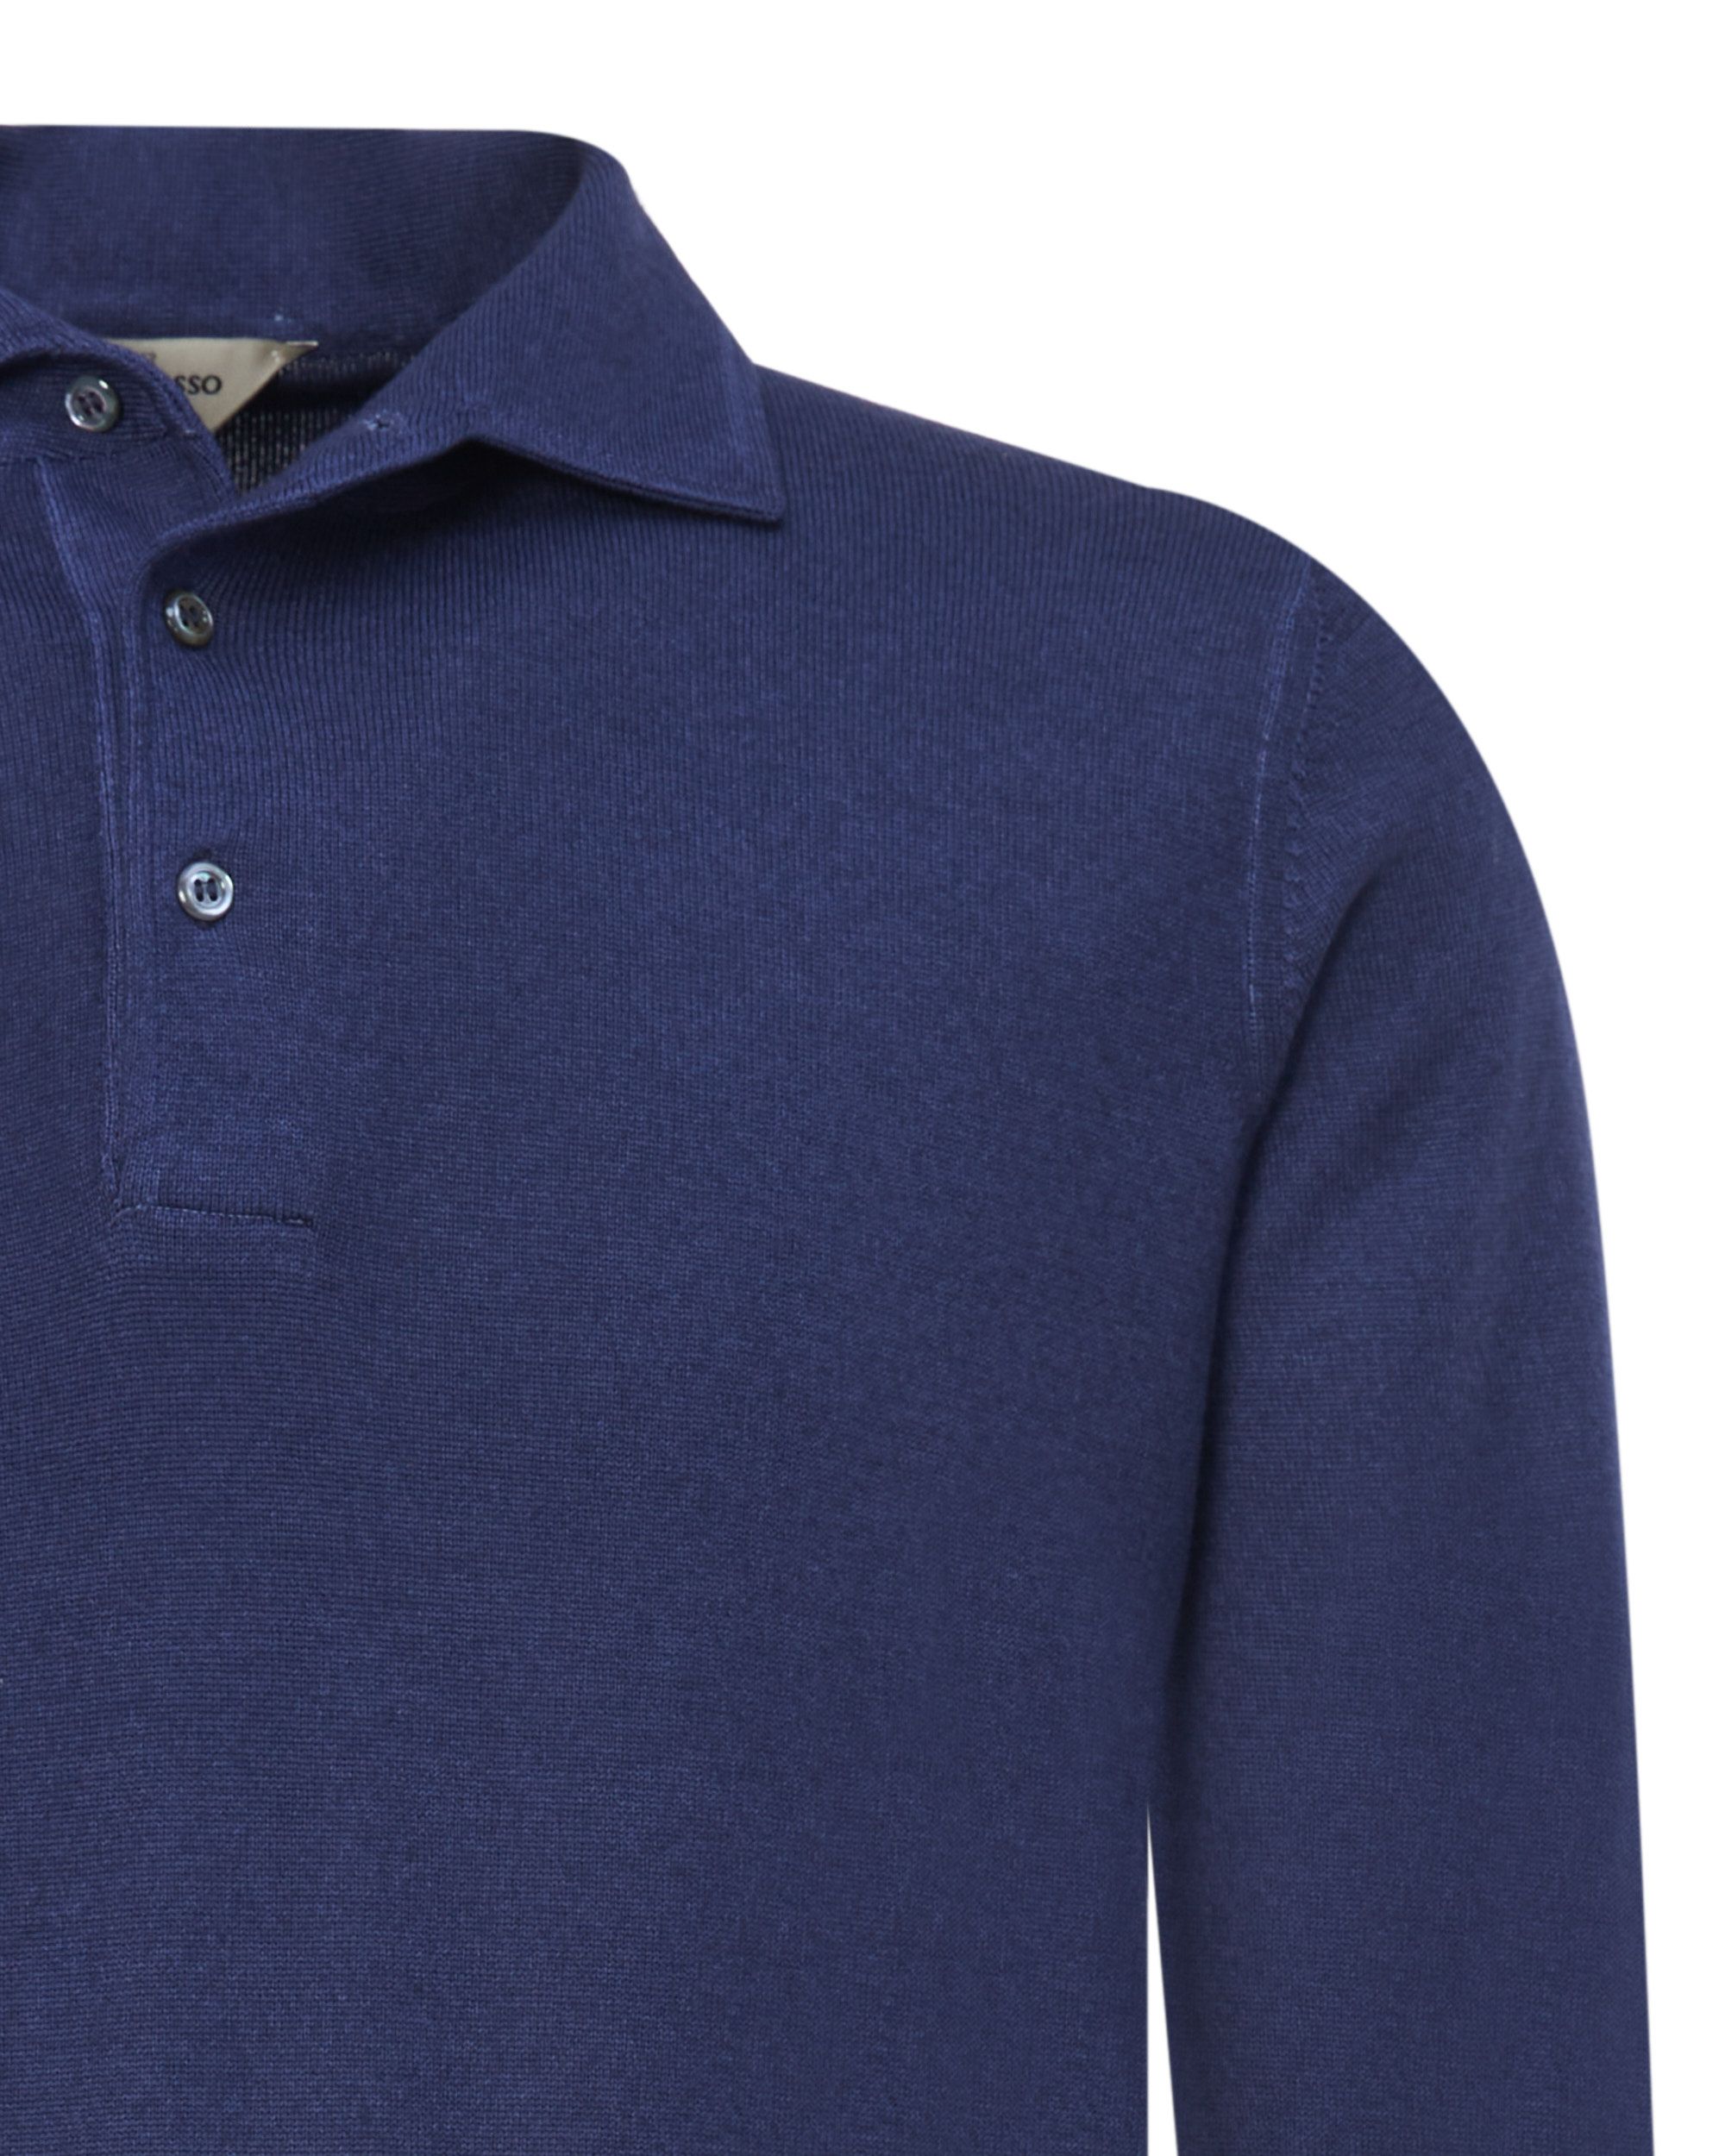 Gran Sasso Polo LM Donker blauw 078914-002-48